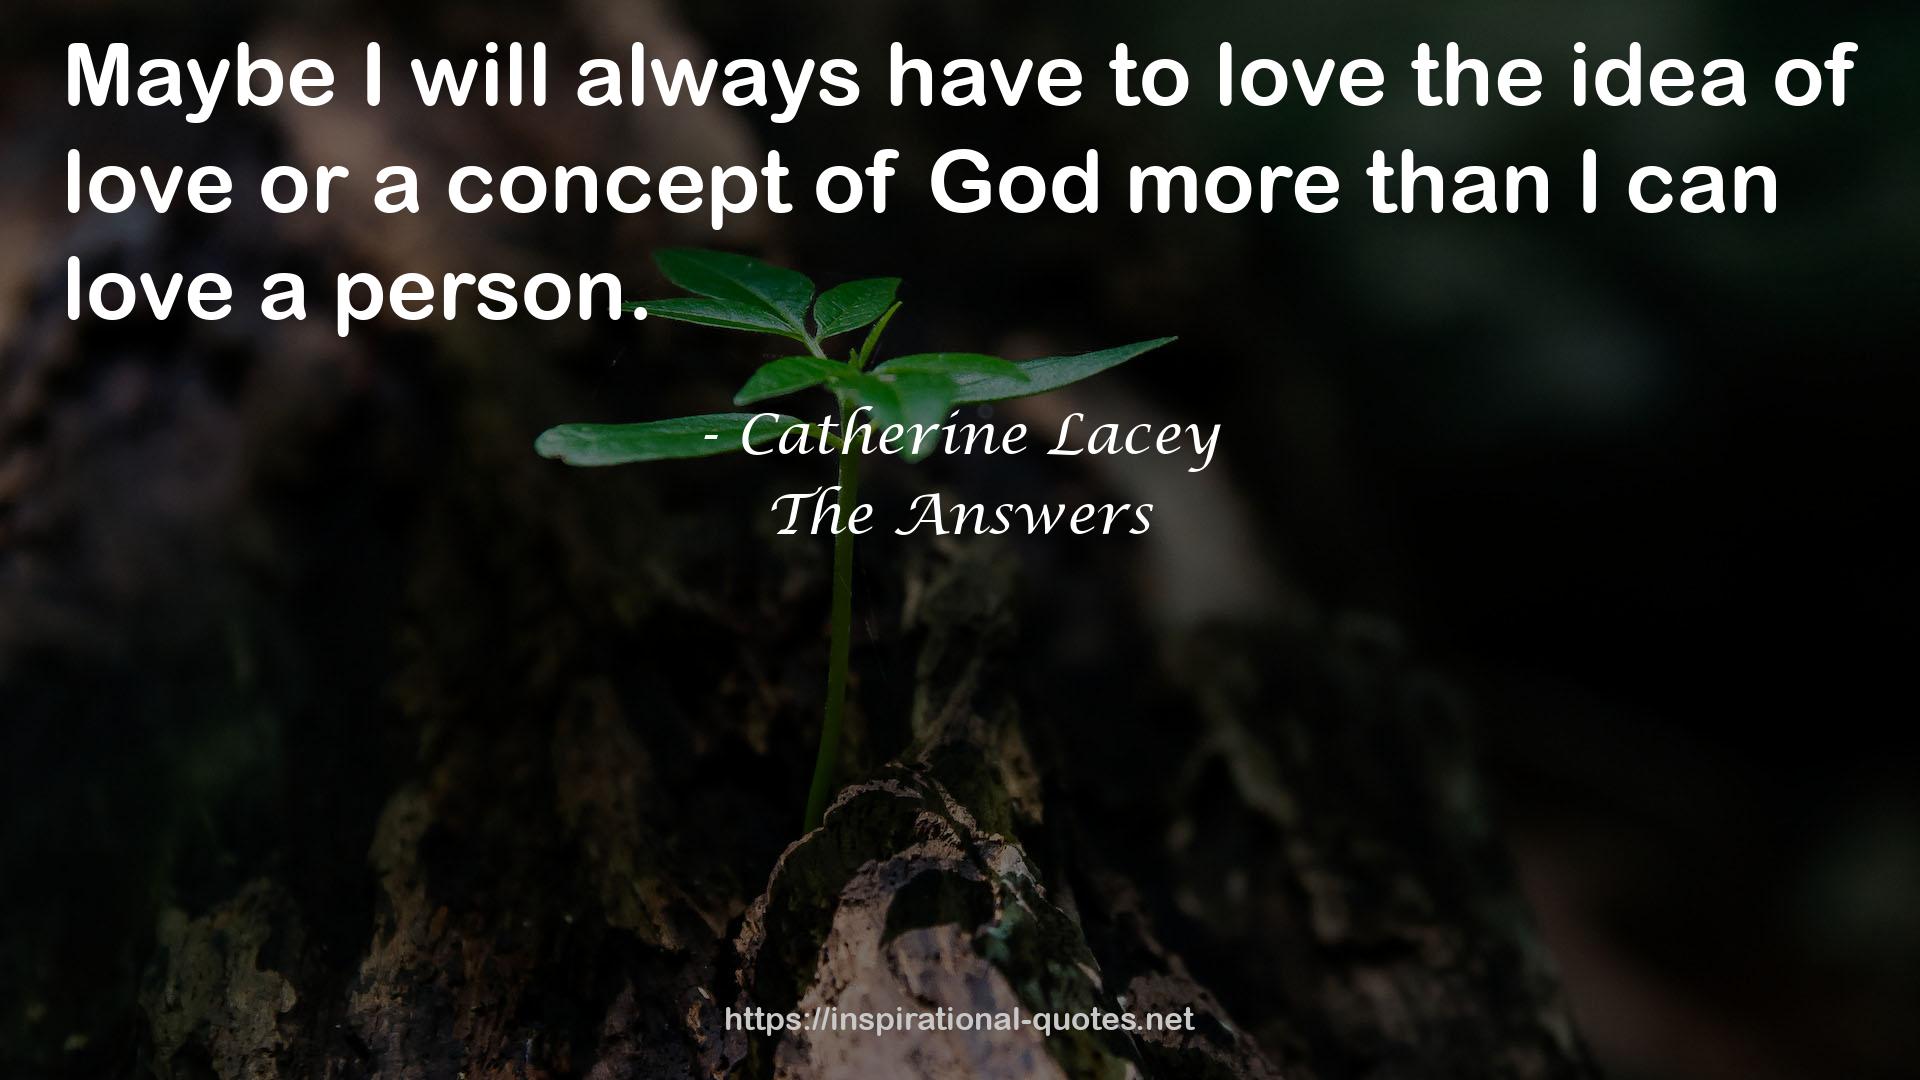 Catherine Lacey QUOTES